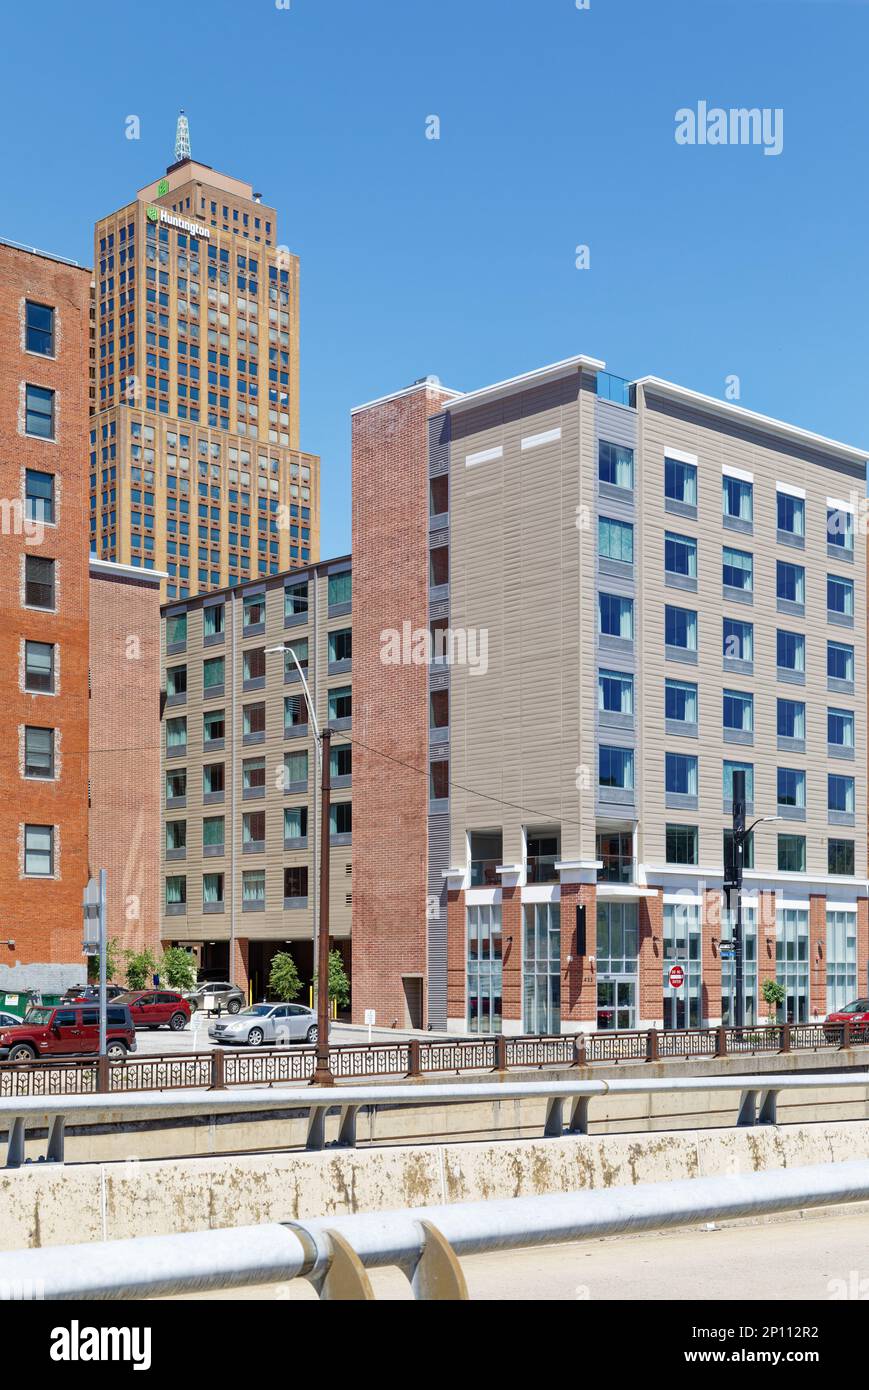 Pittsburgh Downtown: Fairfield Inn & Suites is a modern brick-and-terra cotta-clad mid-rise hotel, opened in 2019, overlooking Monongahela River. Stock Photo